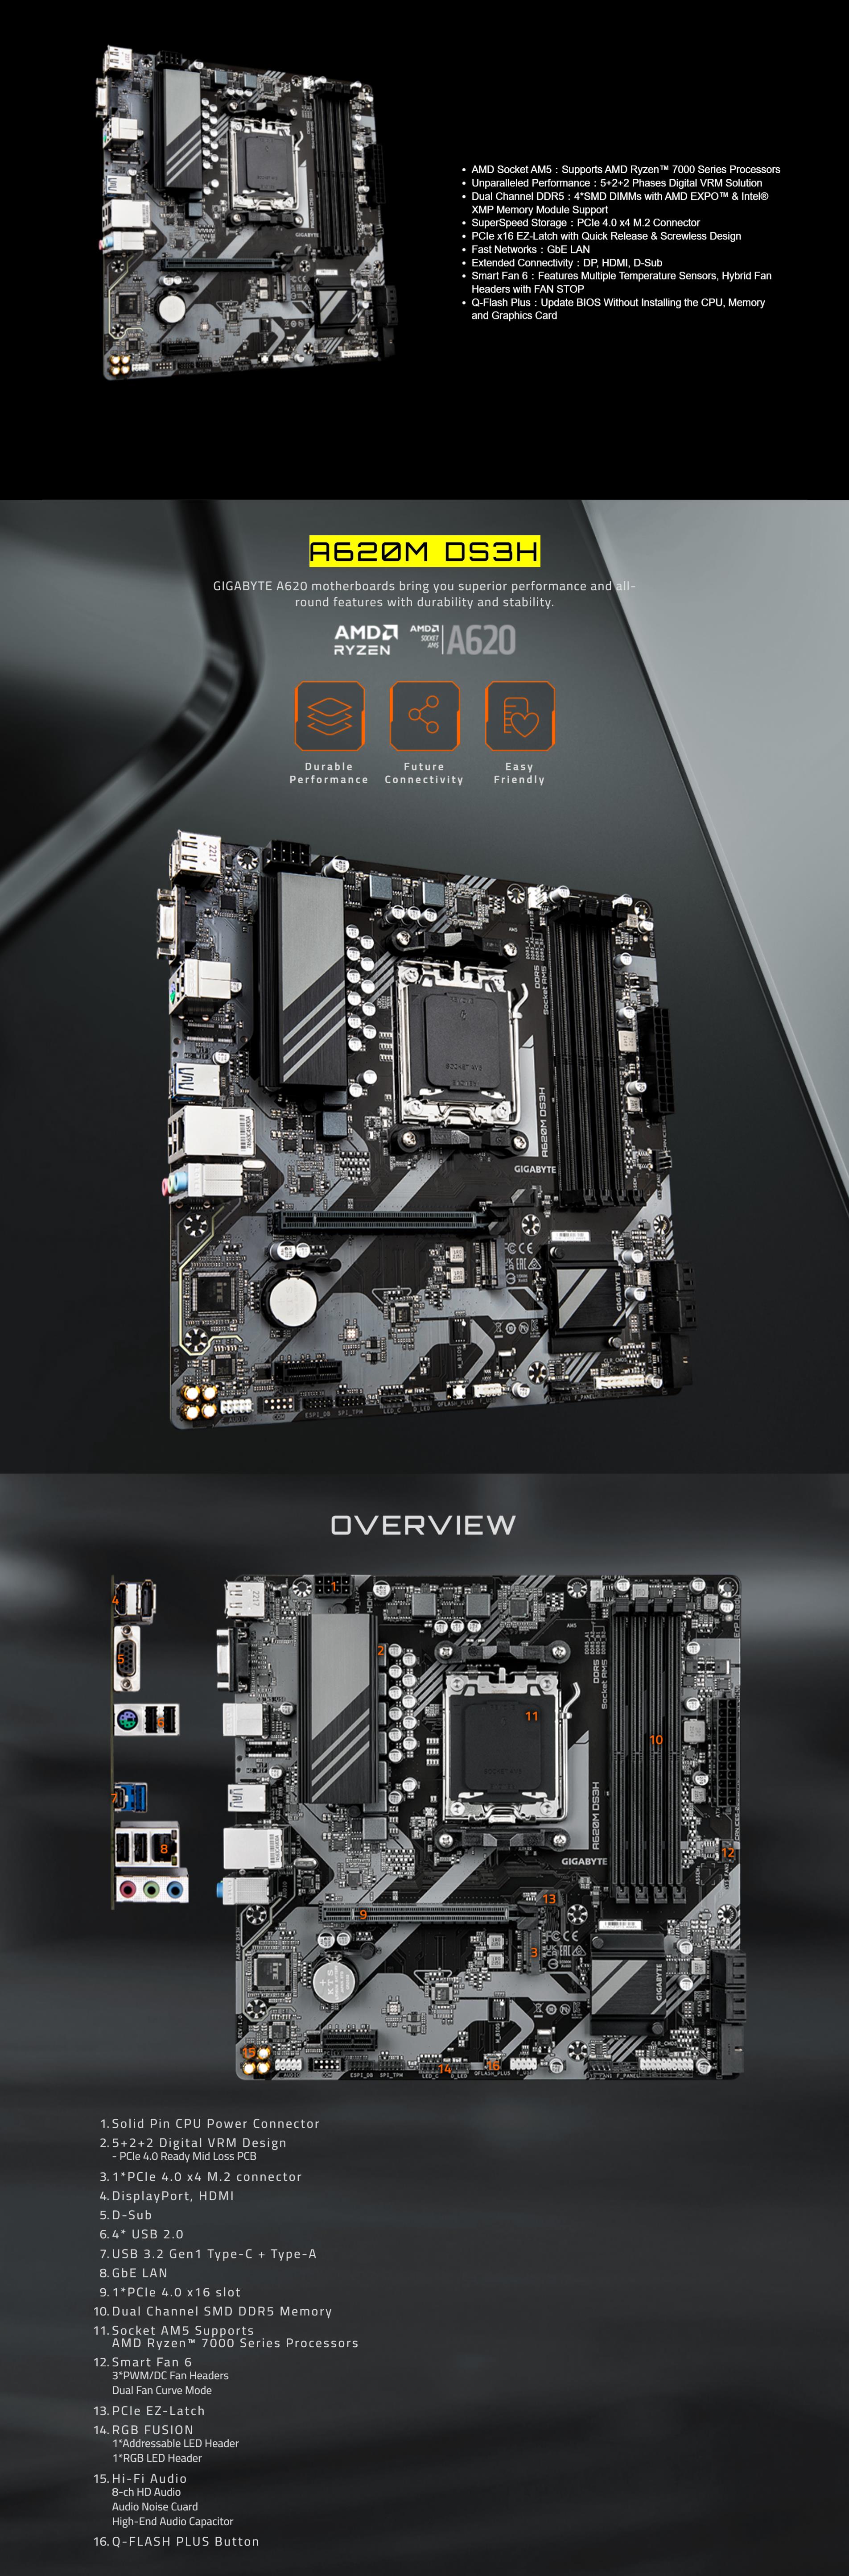 A large marketing image providing additional information about the product Gigabyte A620M DS3H AM5 mATX Desktop Motherboard - Additional alt info not provided